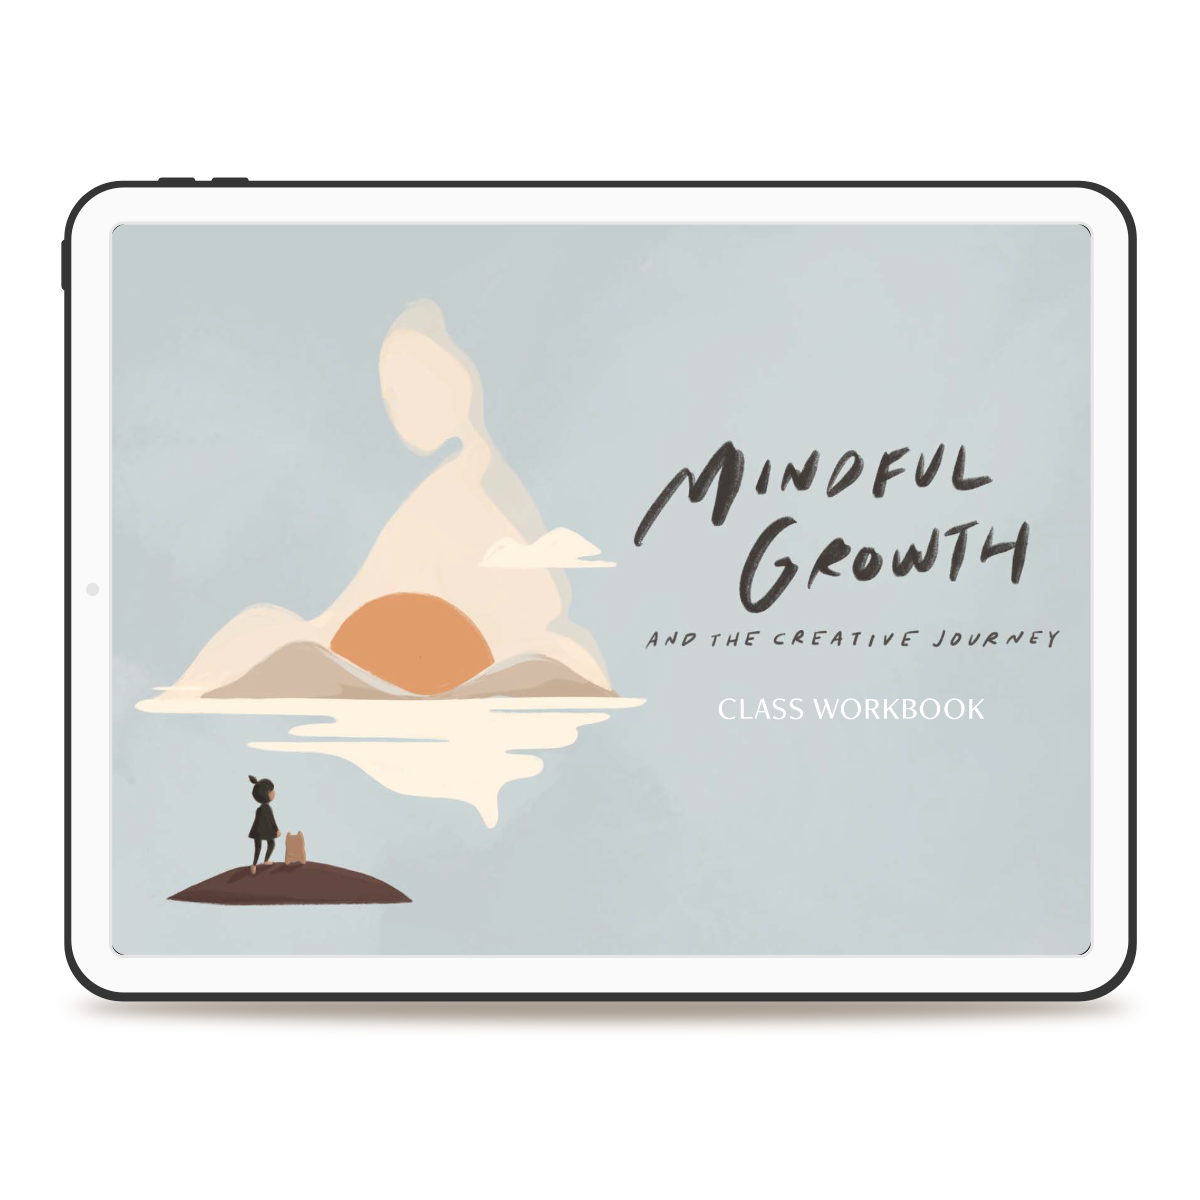 Mindful Growth | Class